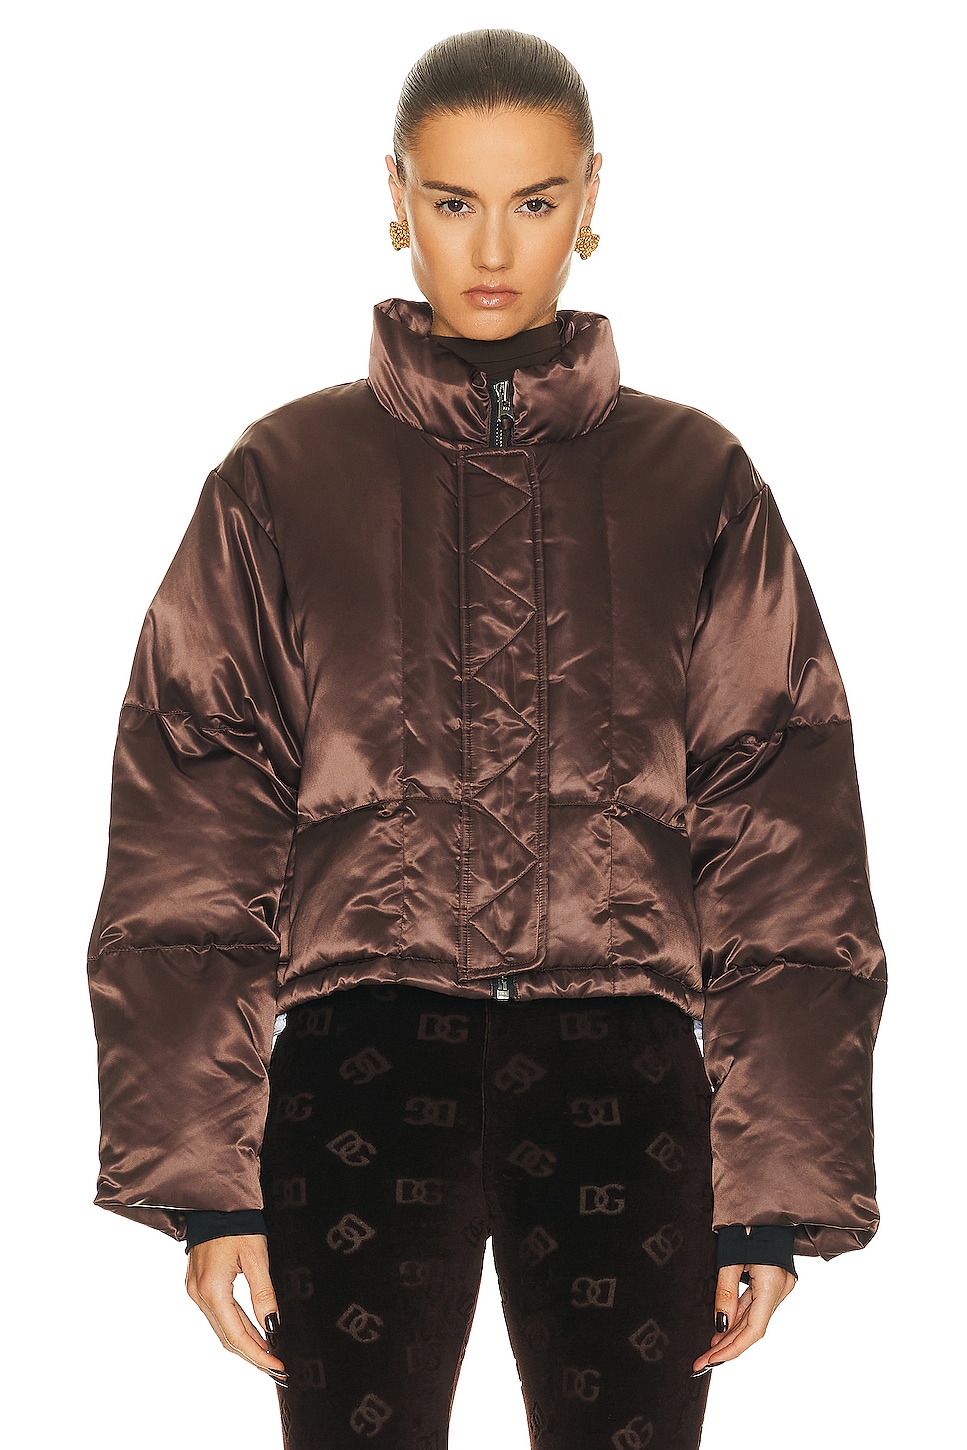 Image 1 of Shoreditch Ski Club Roux Puffer Jacket in Bitter Chocolate Brown